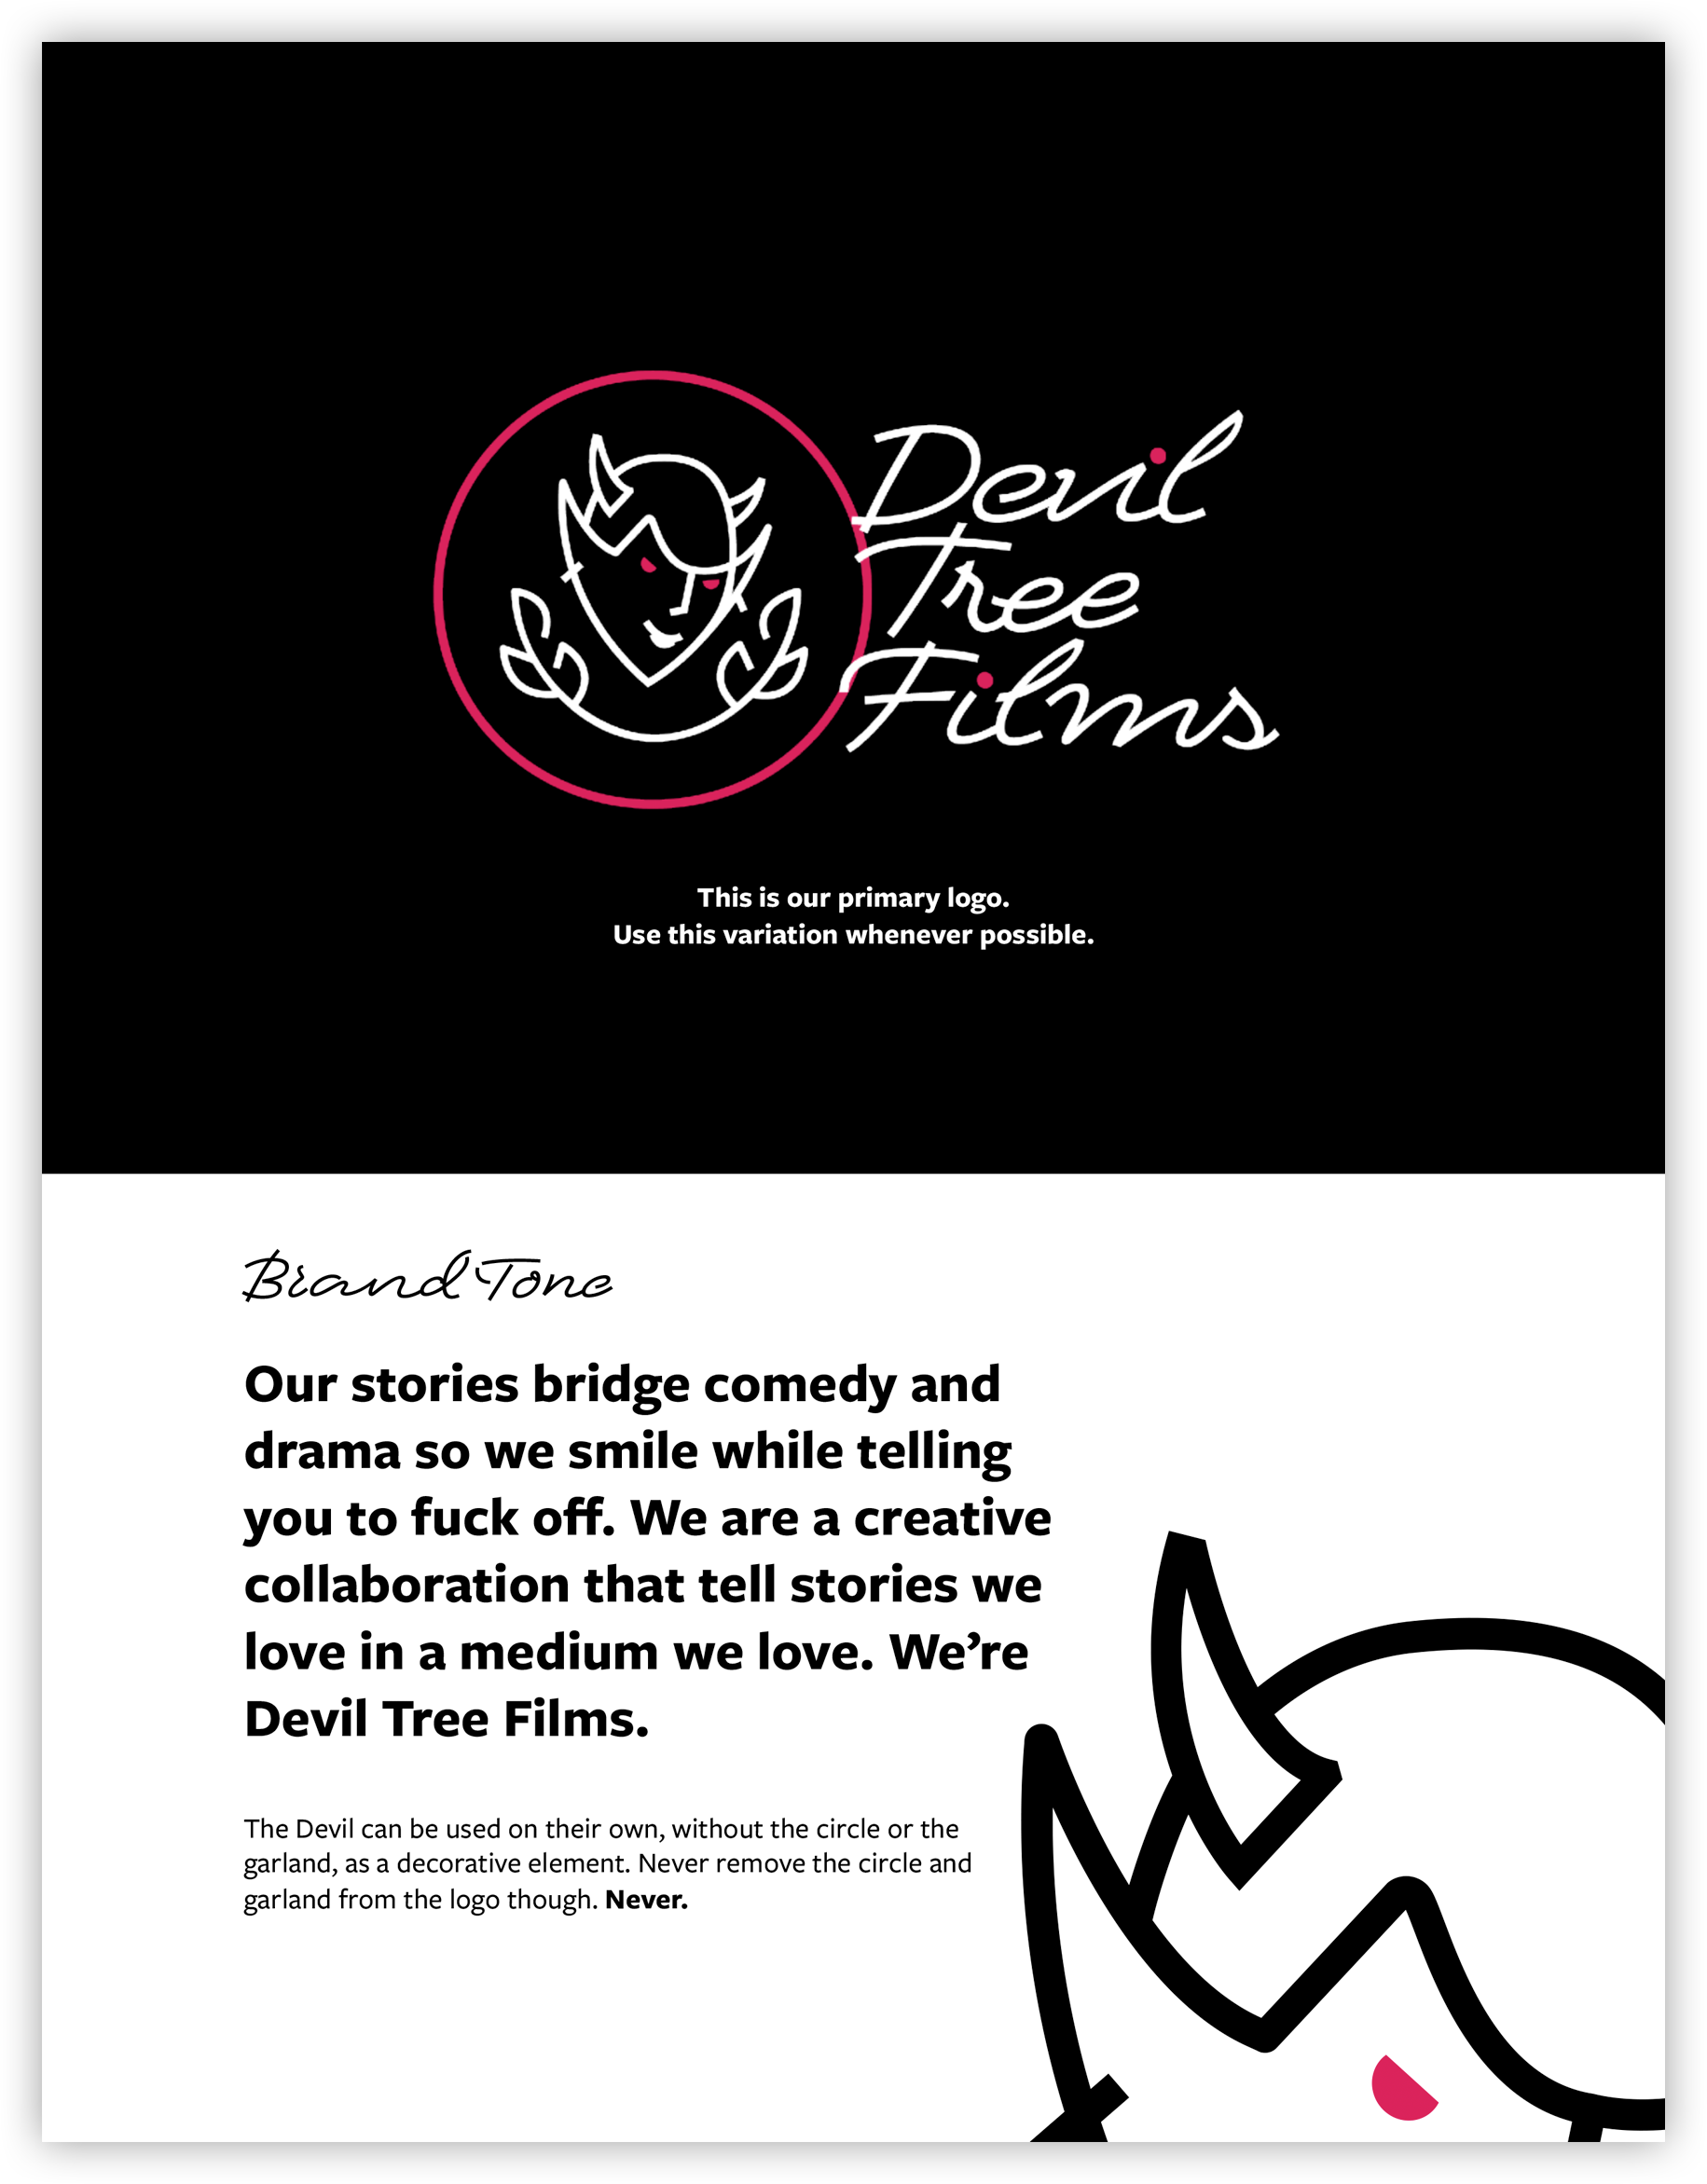 The first page of the Devil Tree Films style guide.